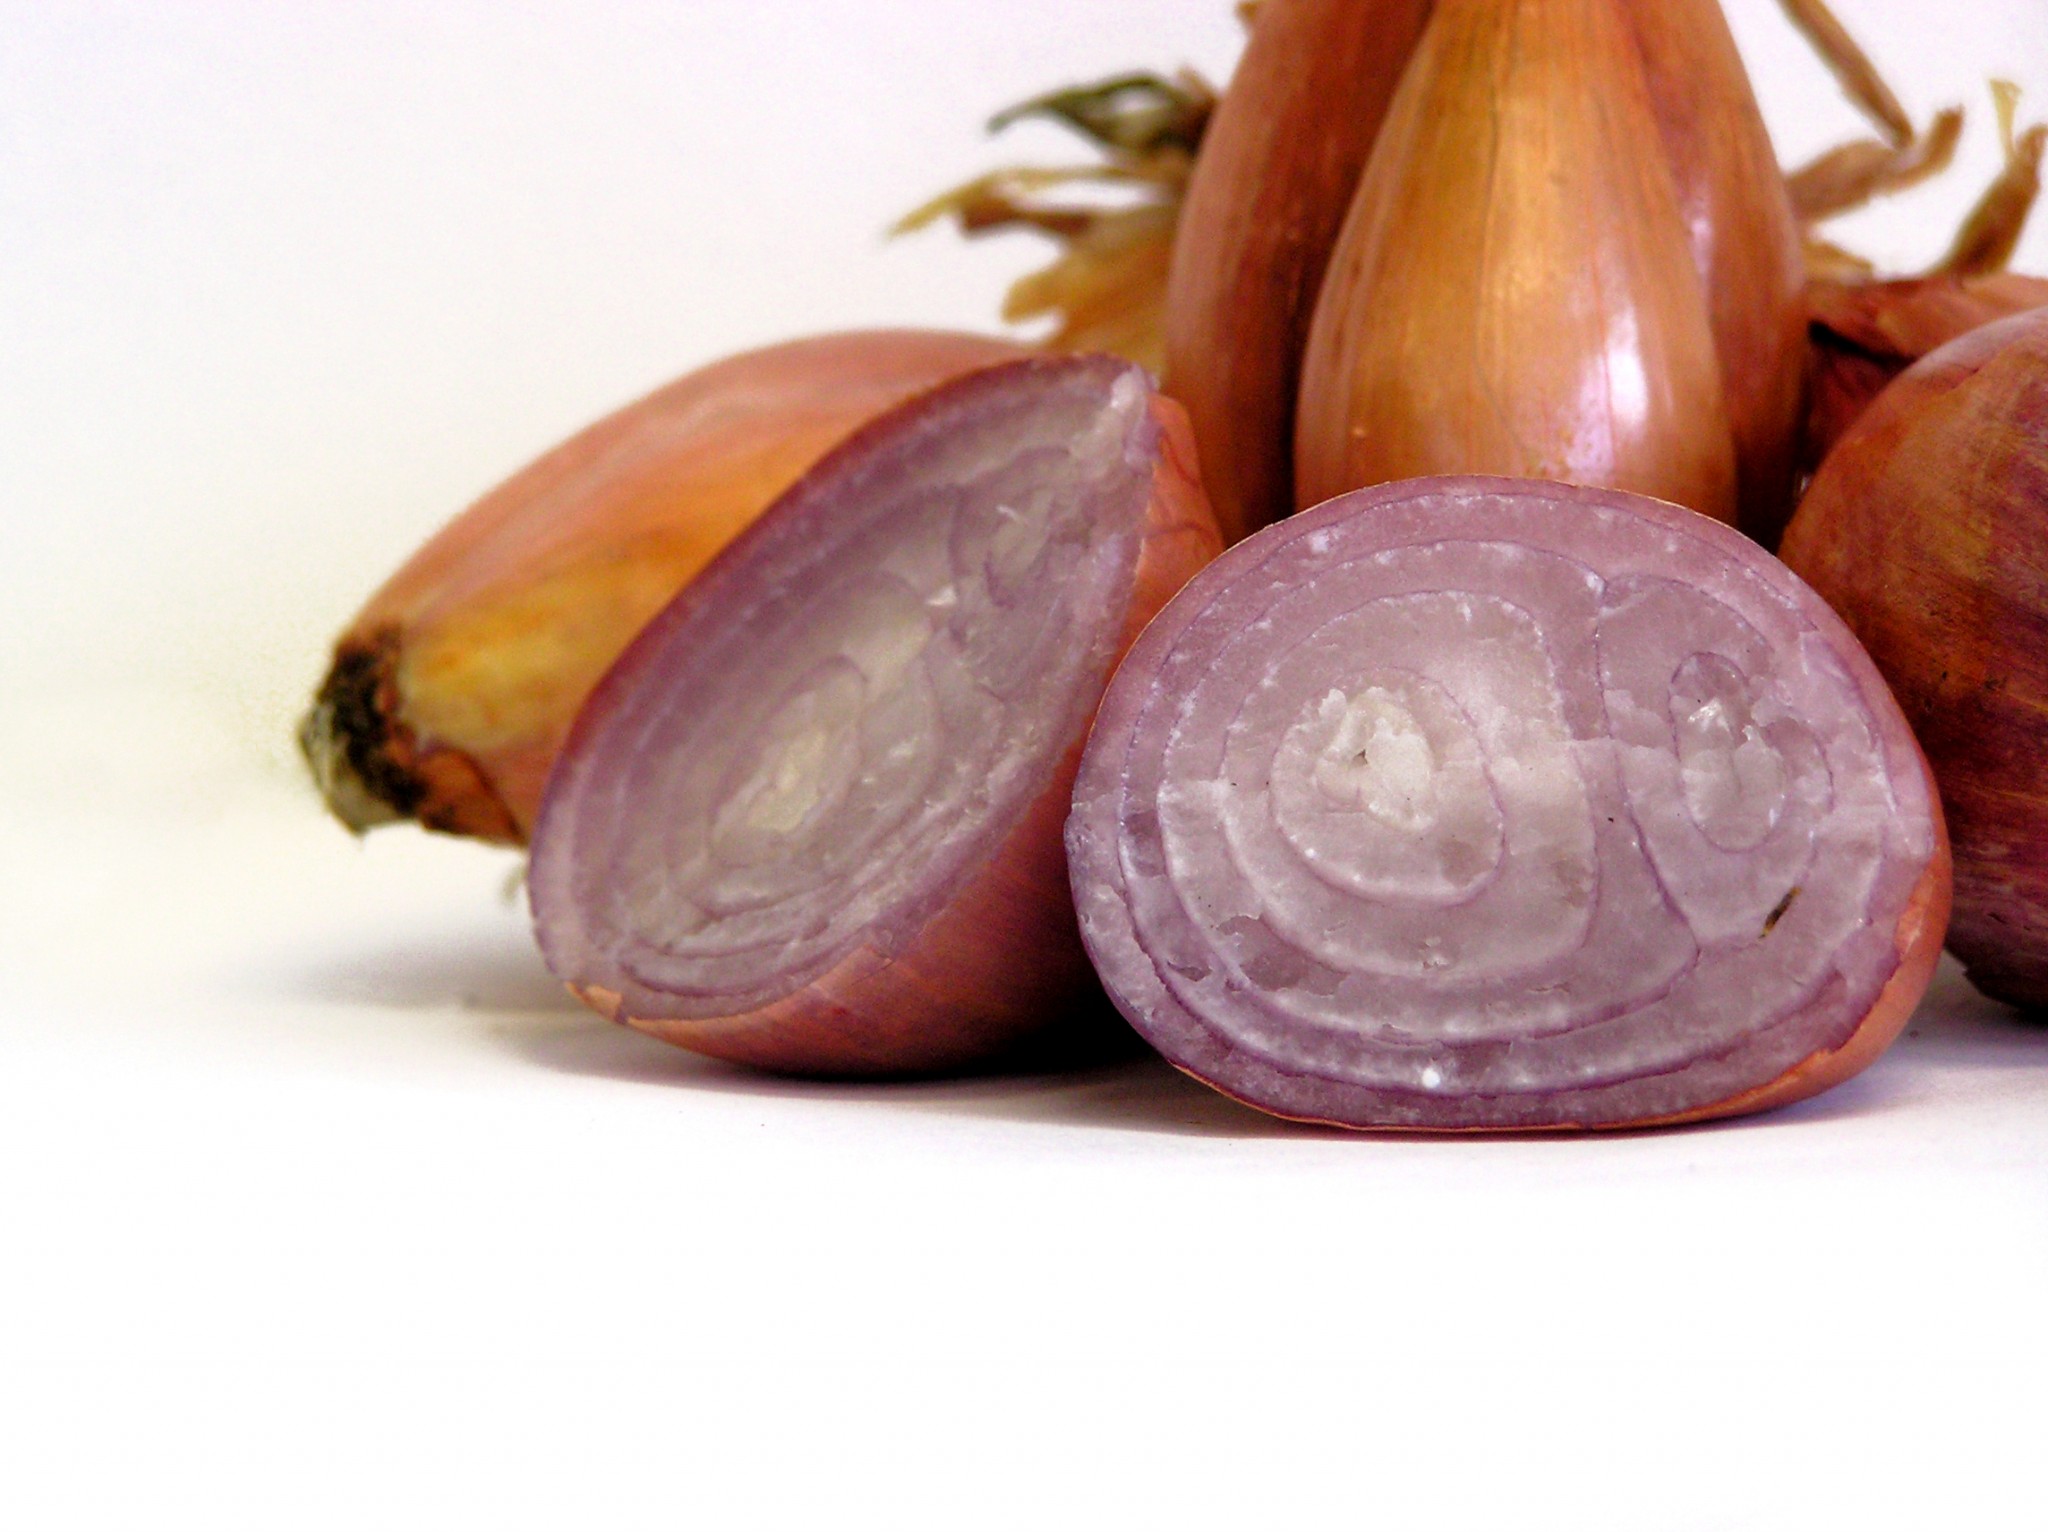 What Are Shallots and How Are They Different Than Onions?